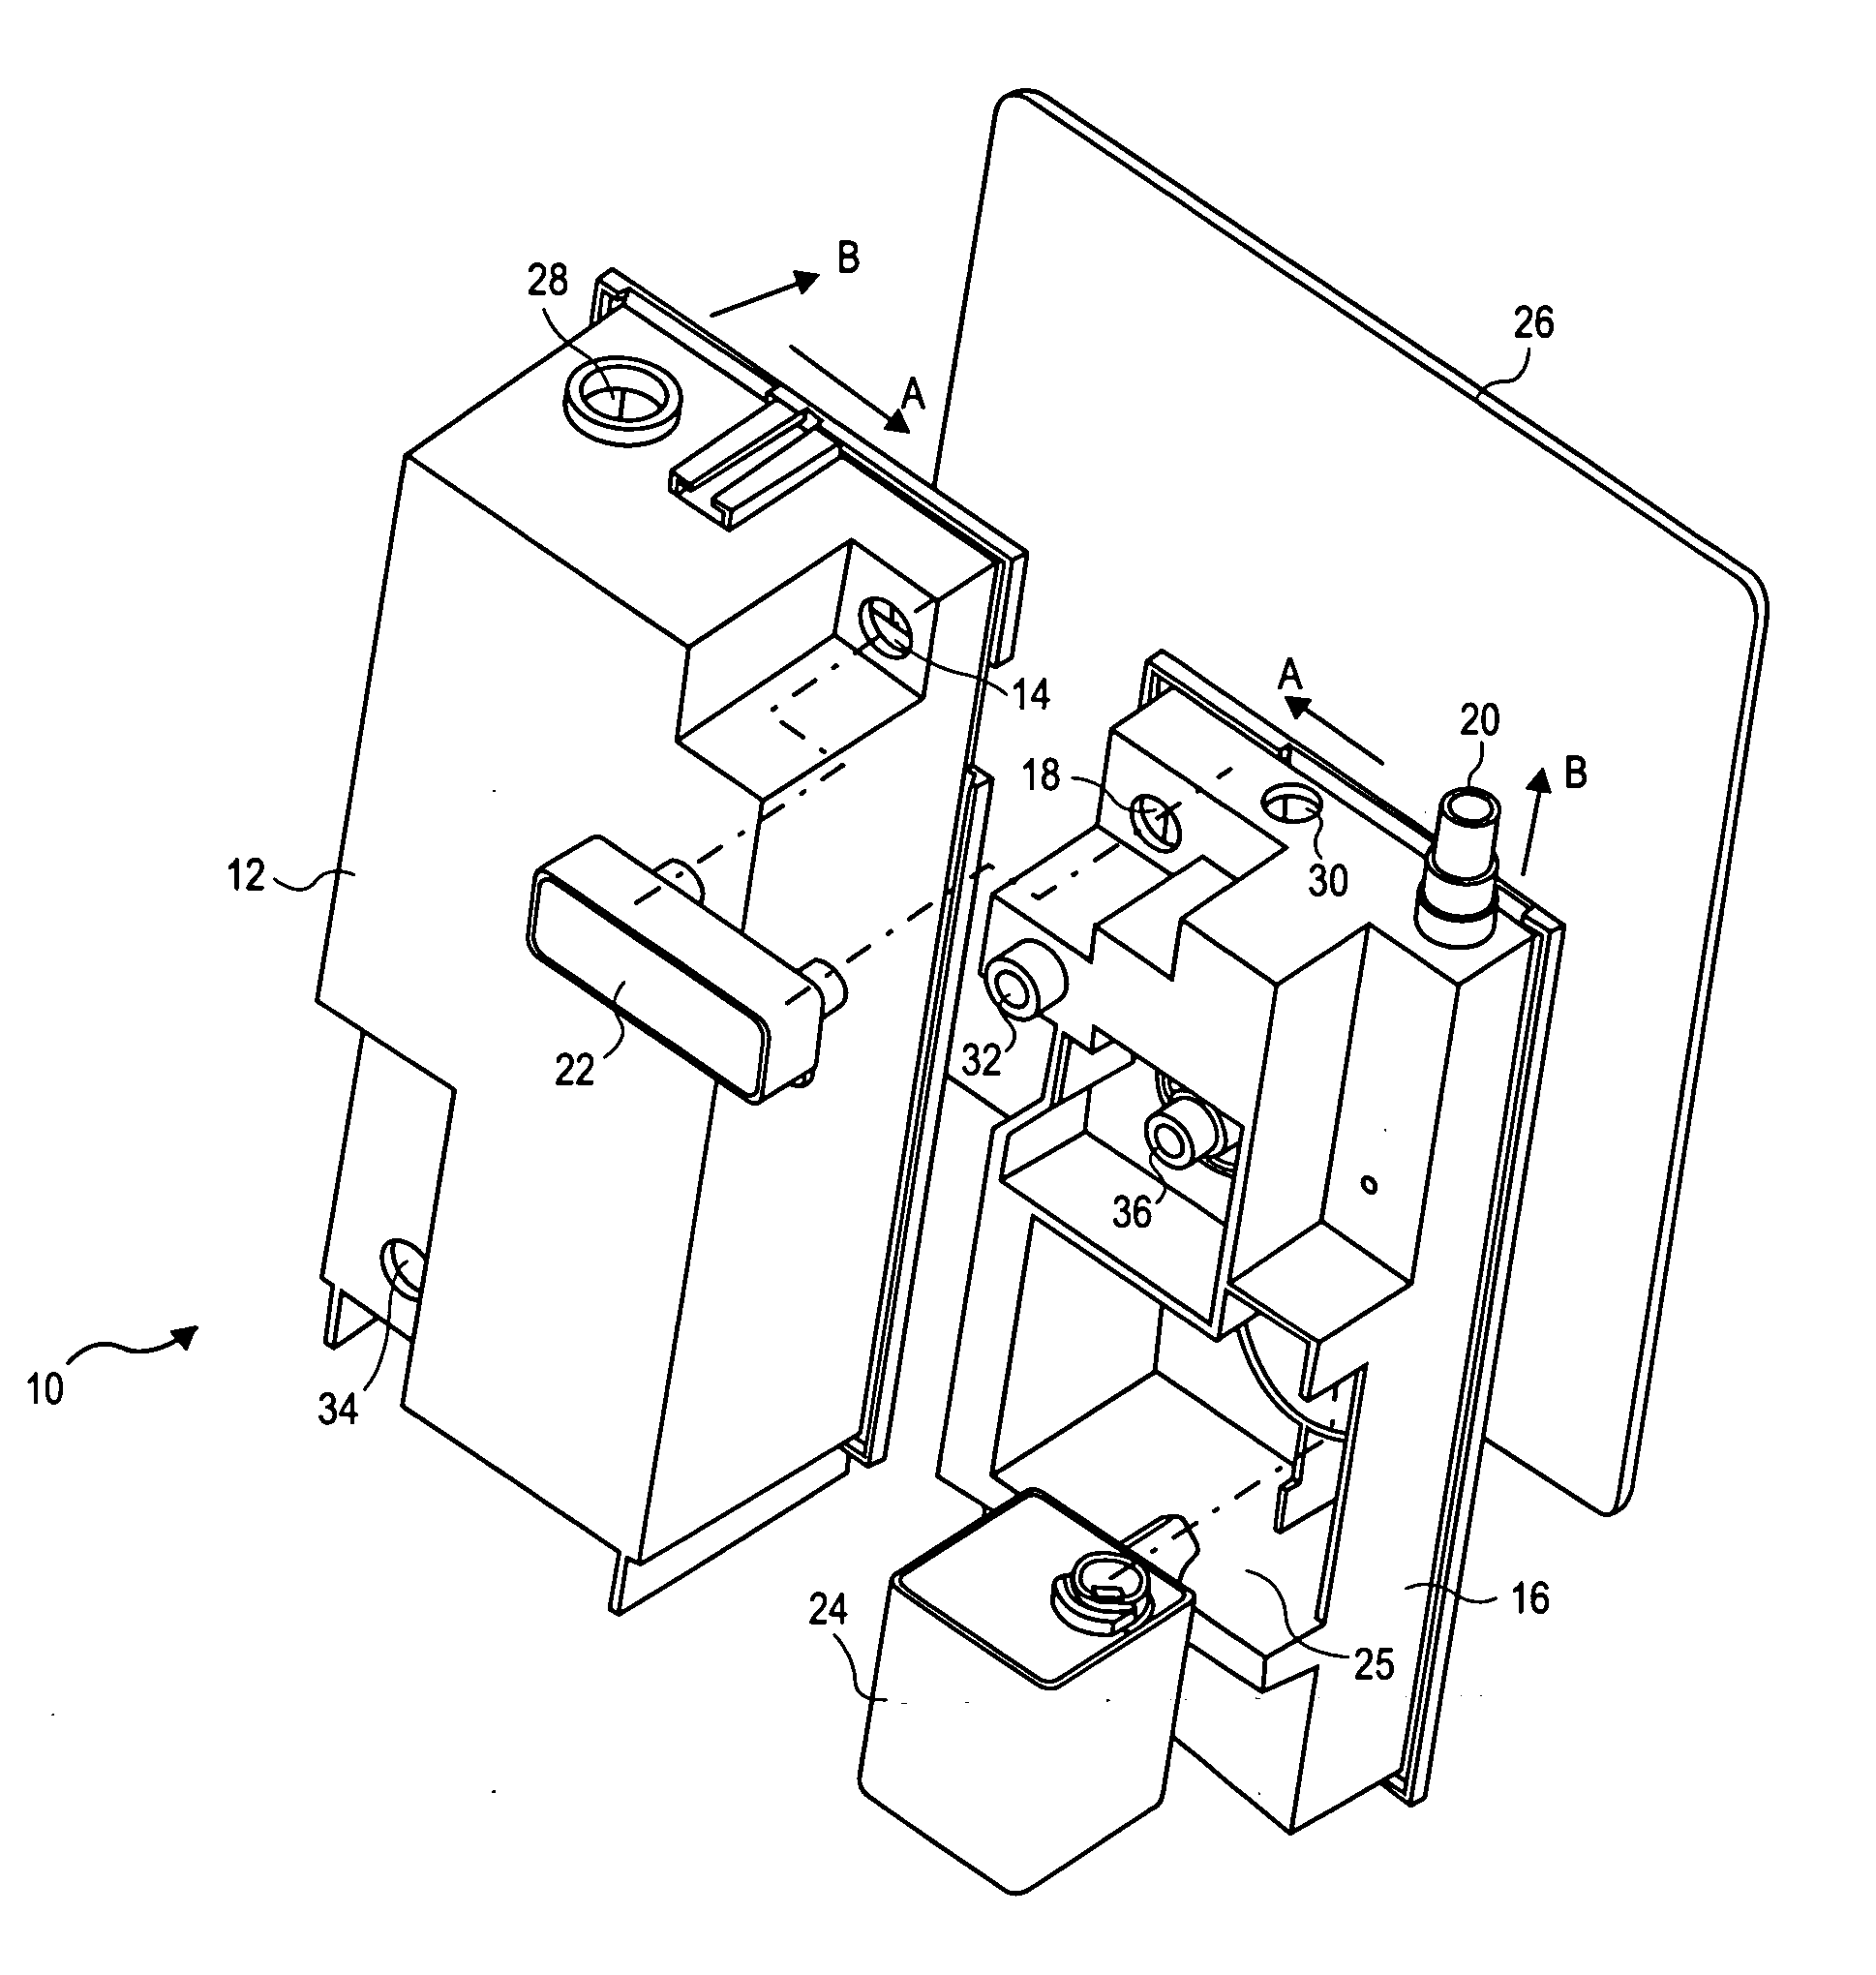 Modular chest drainage design and assembly method